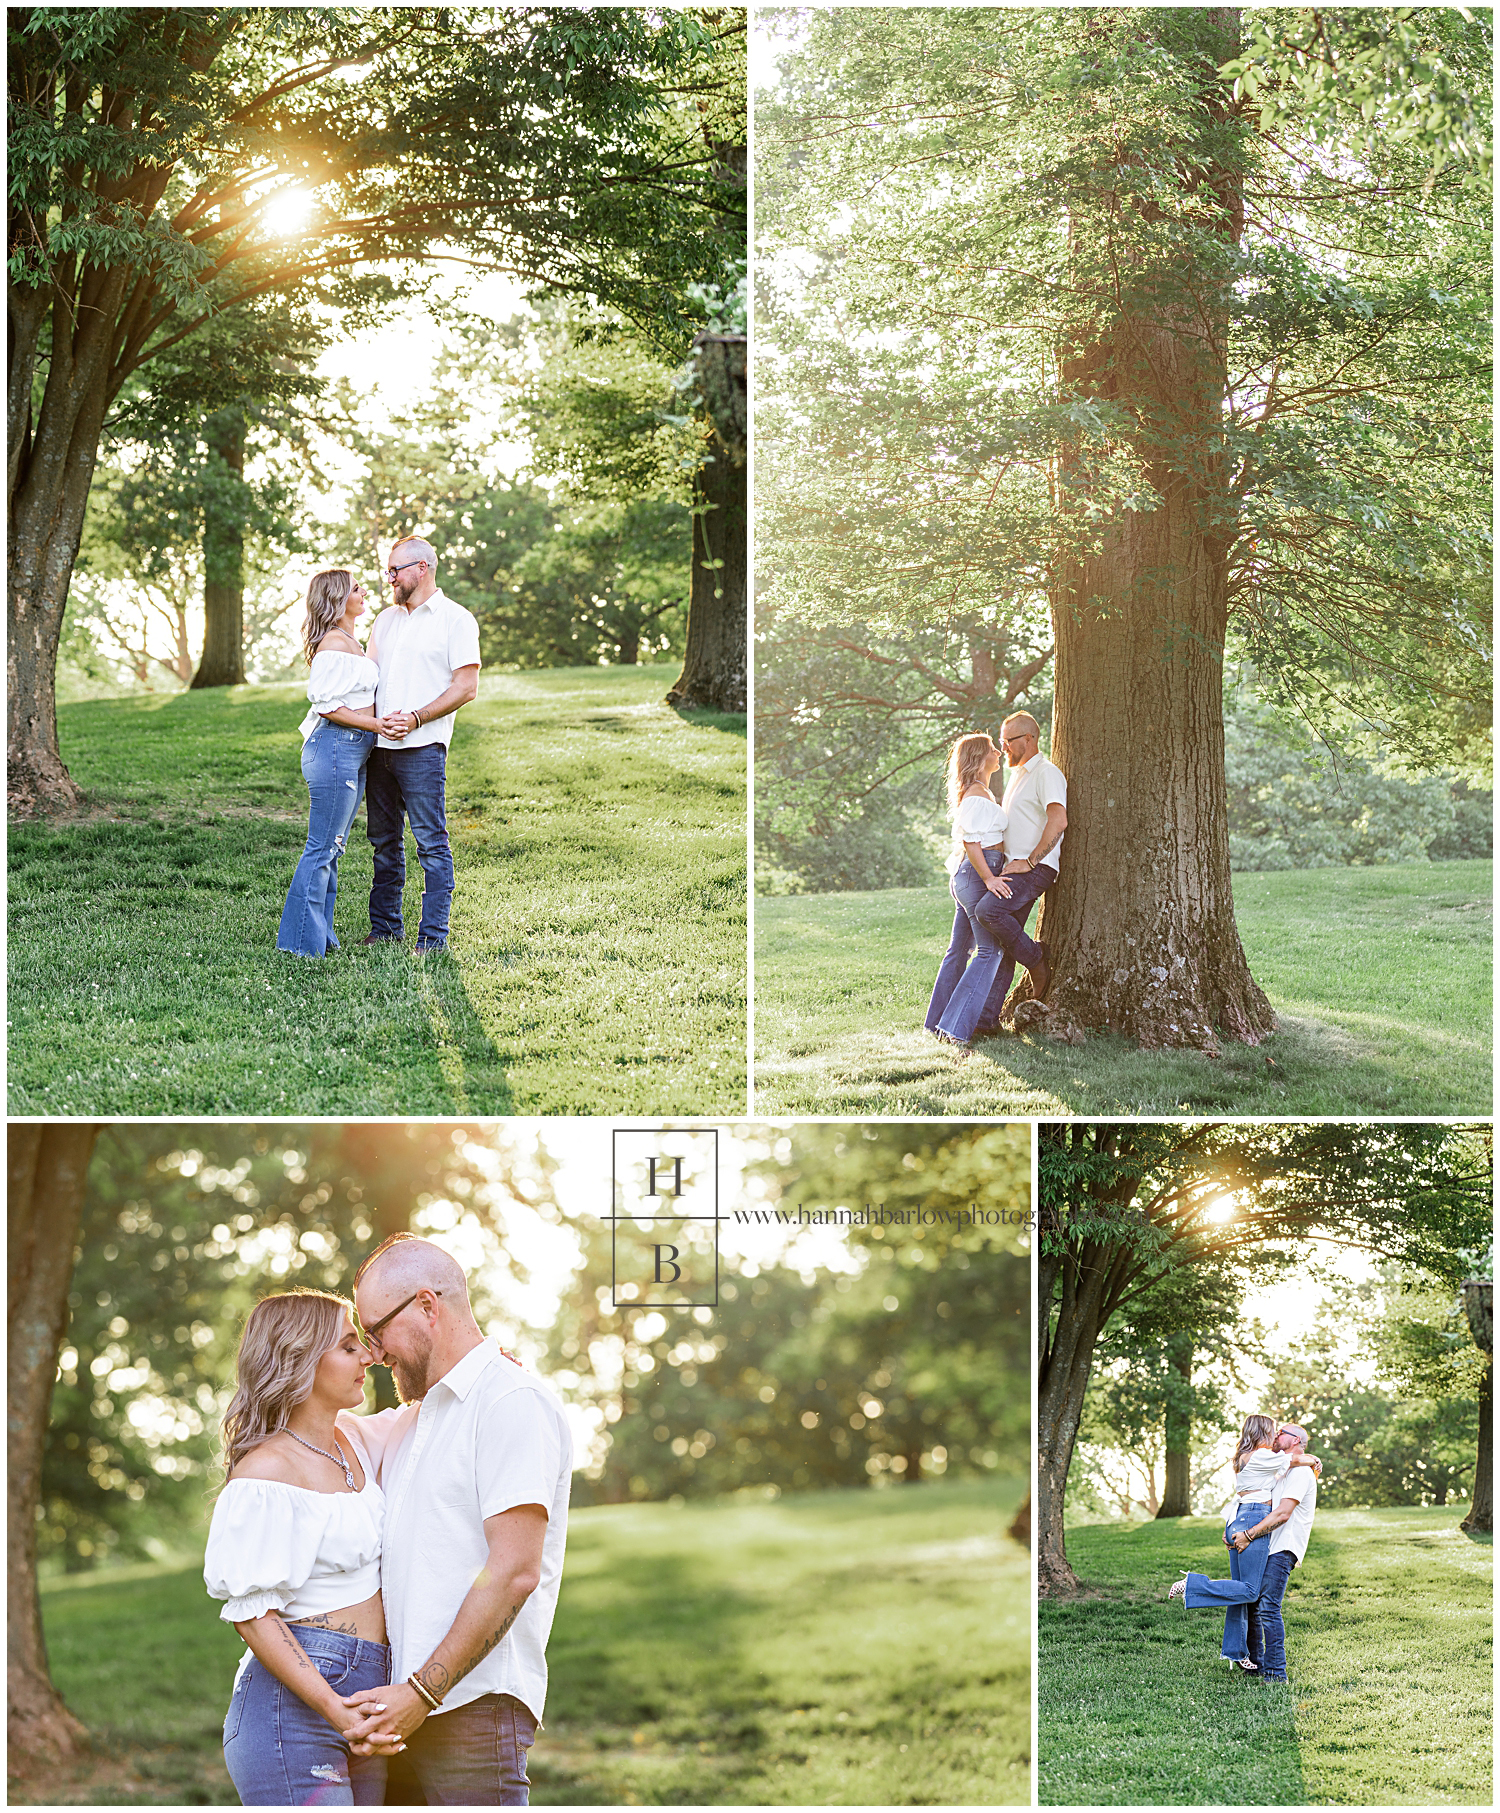 Couple poses in forest during warm golden hour sunset.